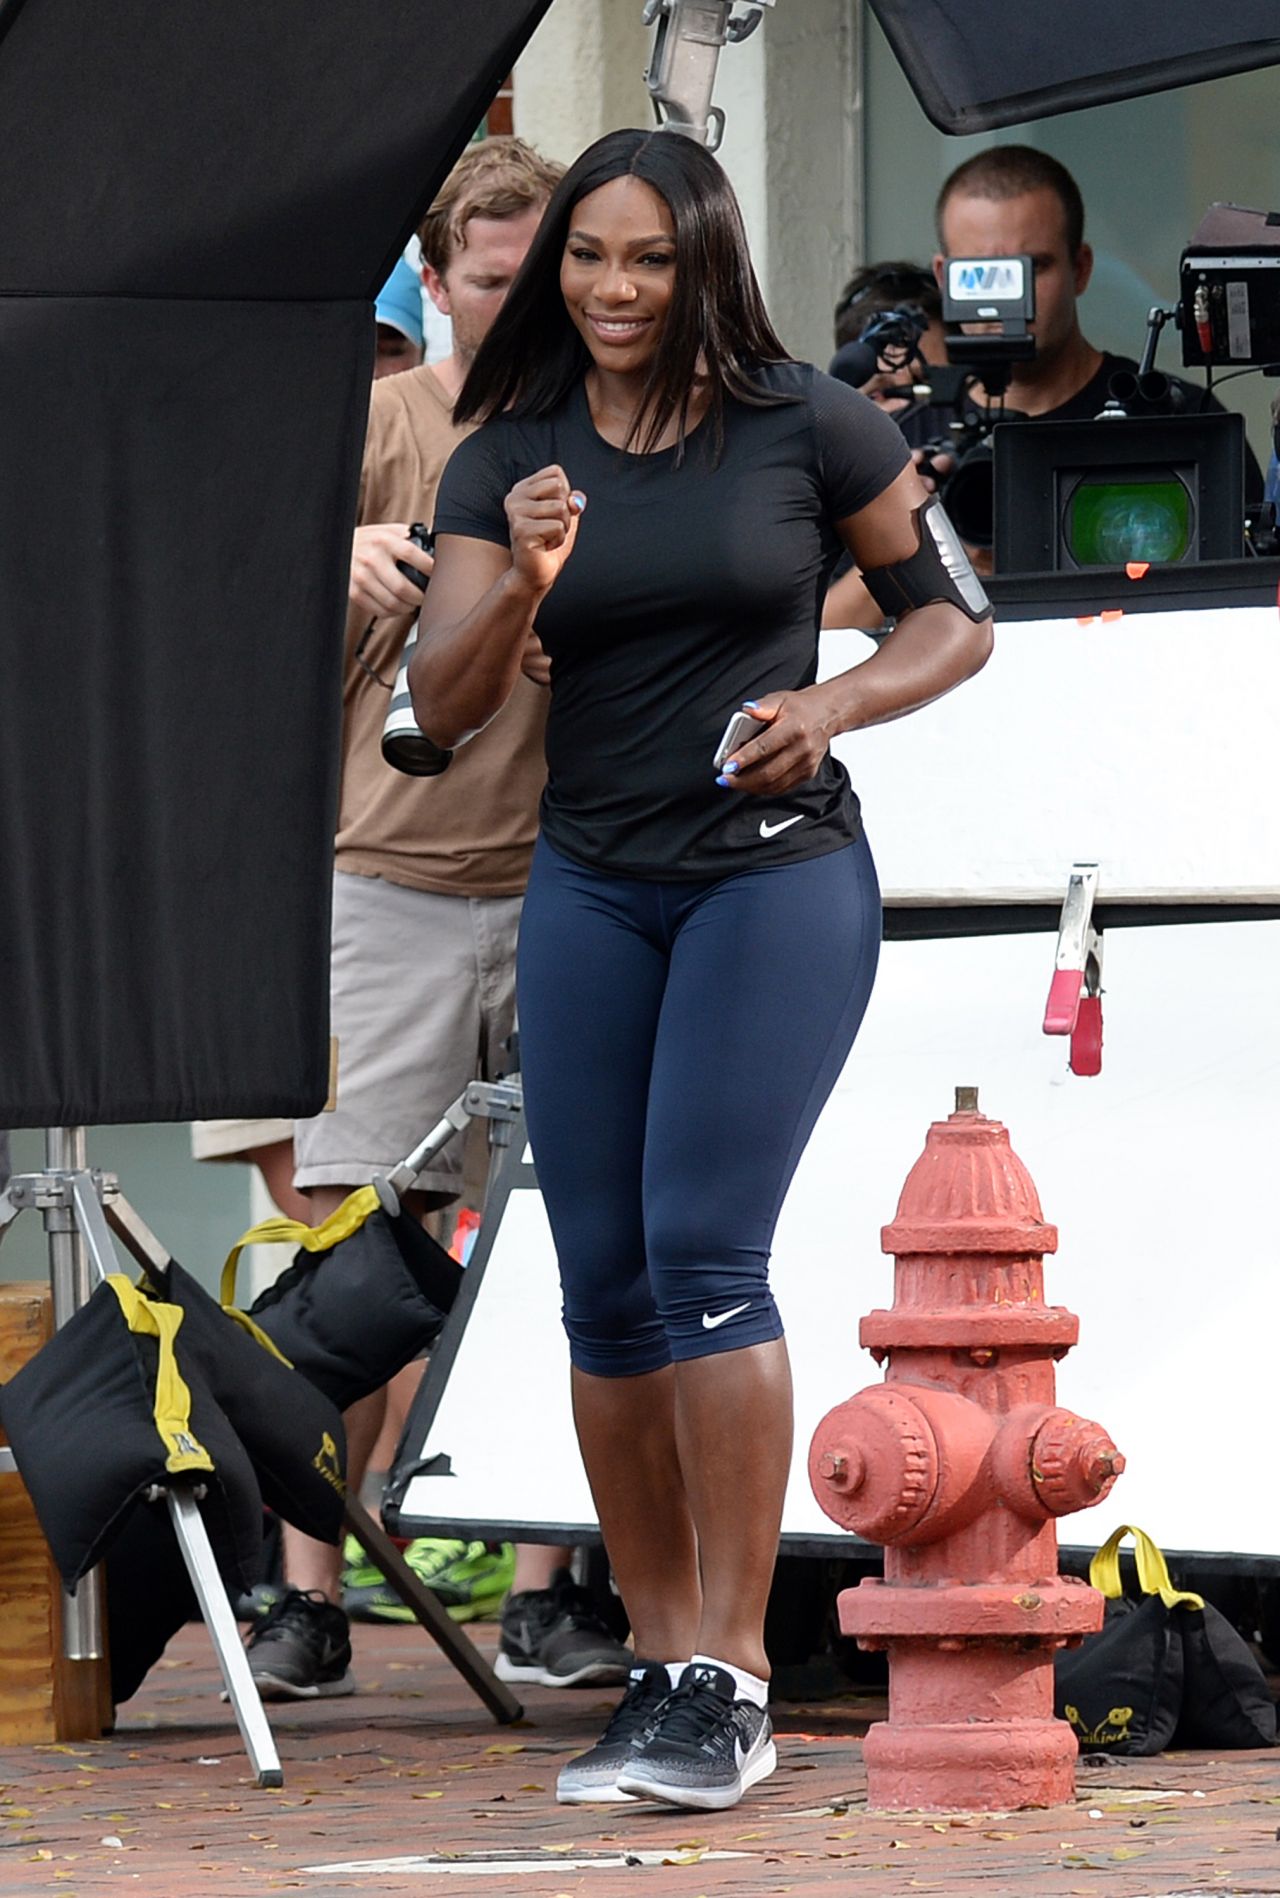 Serena Williams Shows Off Her Famous Curves In Tight Workout Gear Florida 4 4 2016